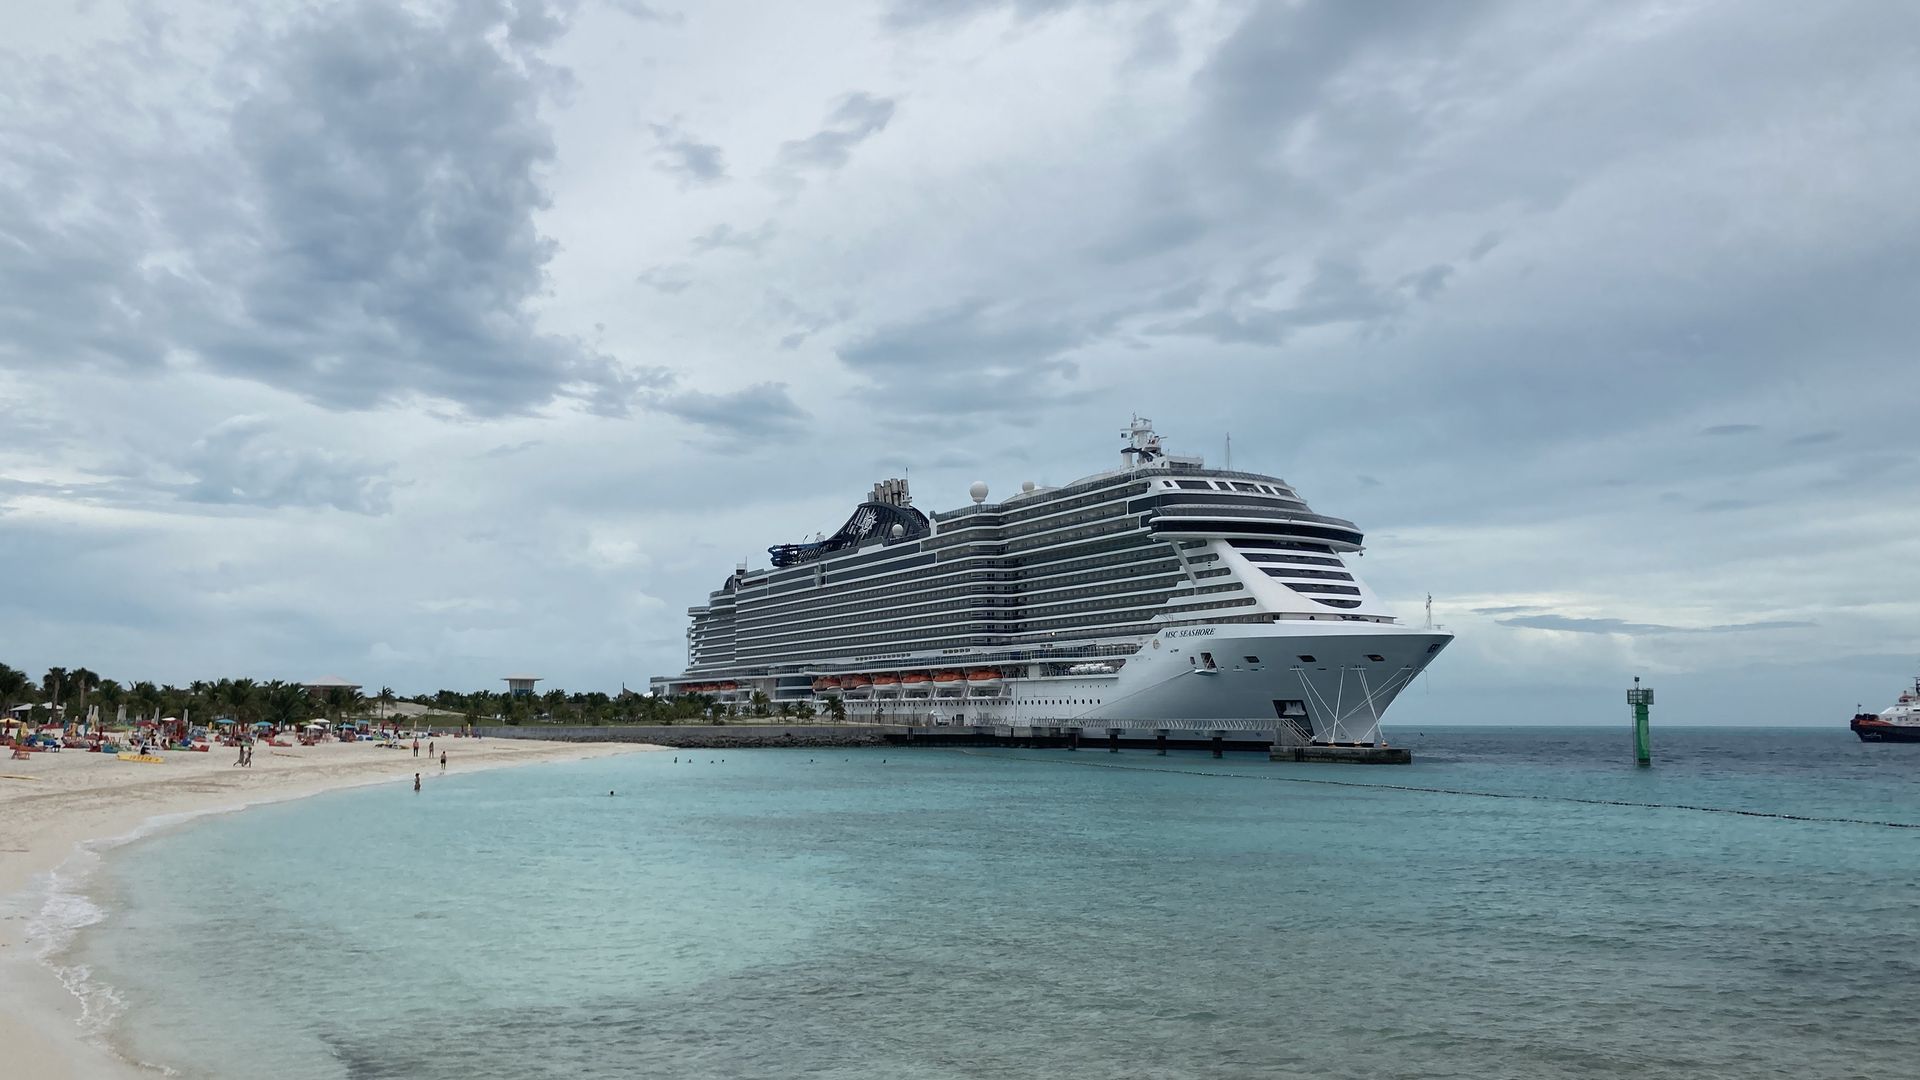 MSC Seashore arrived to PortMiami to begin Caribbean itineraries, including trips to private island Ocean Cay, in November 2021.